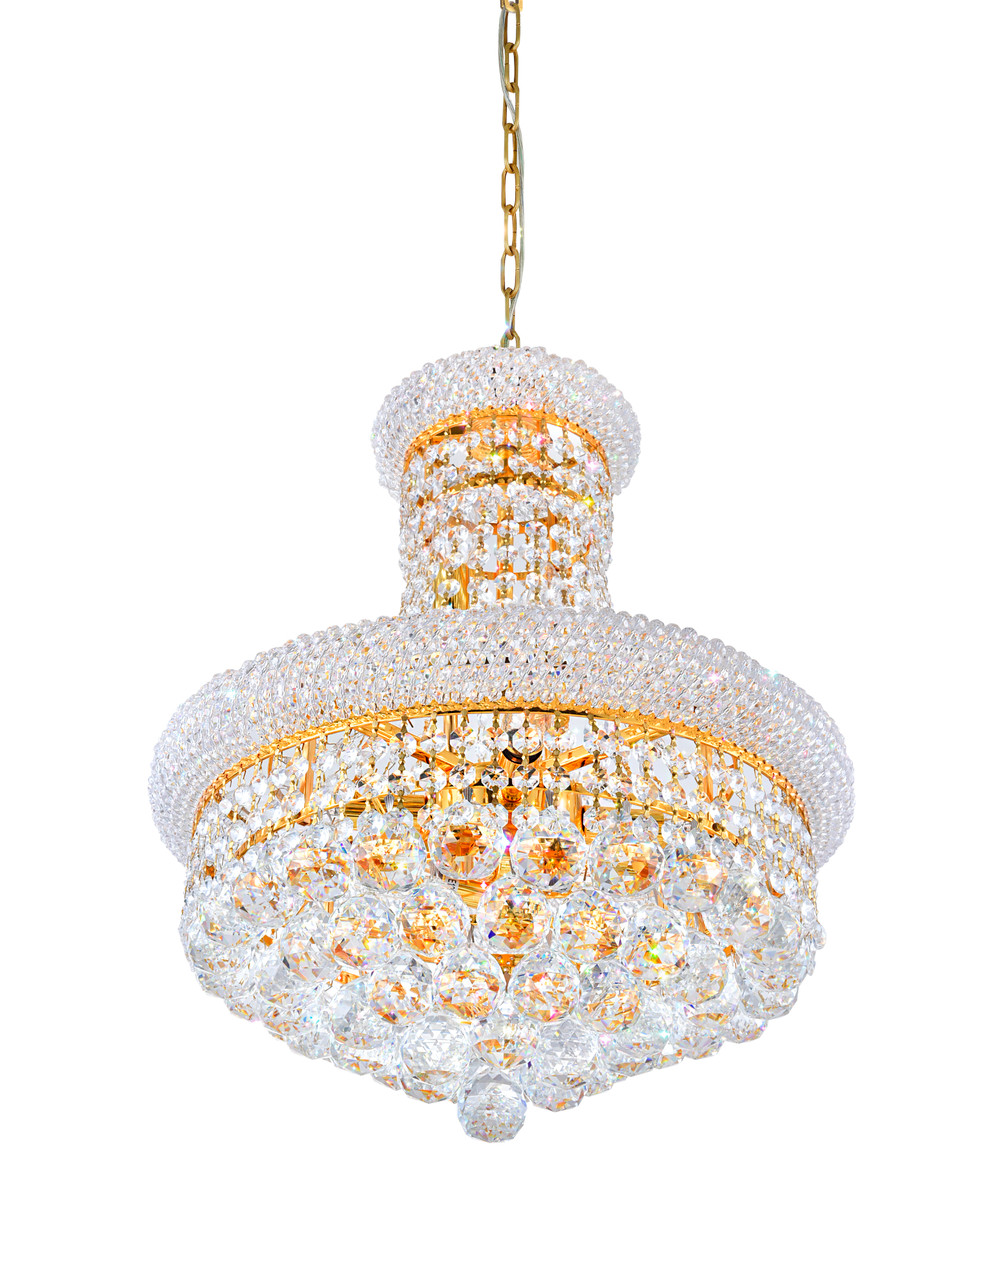 CWI LIGHTING 8001P18G 8 Light Down Chandelier with Gold finish